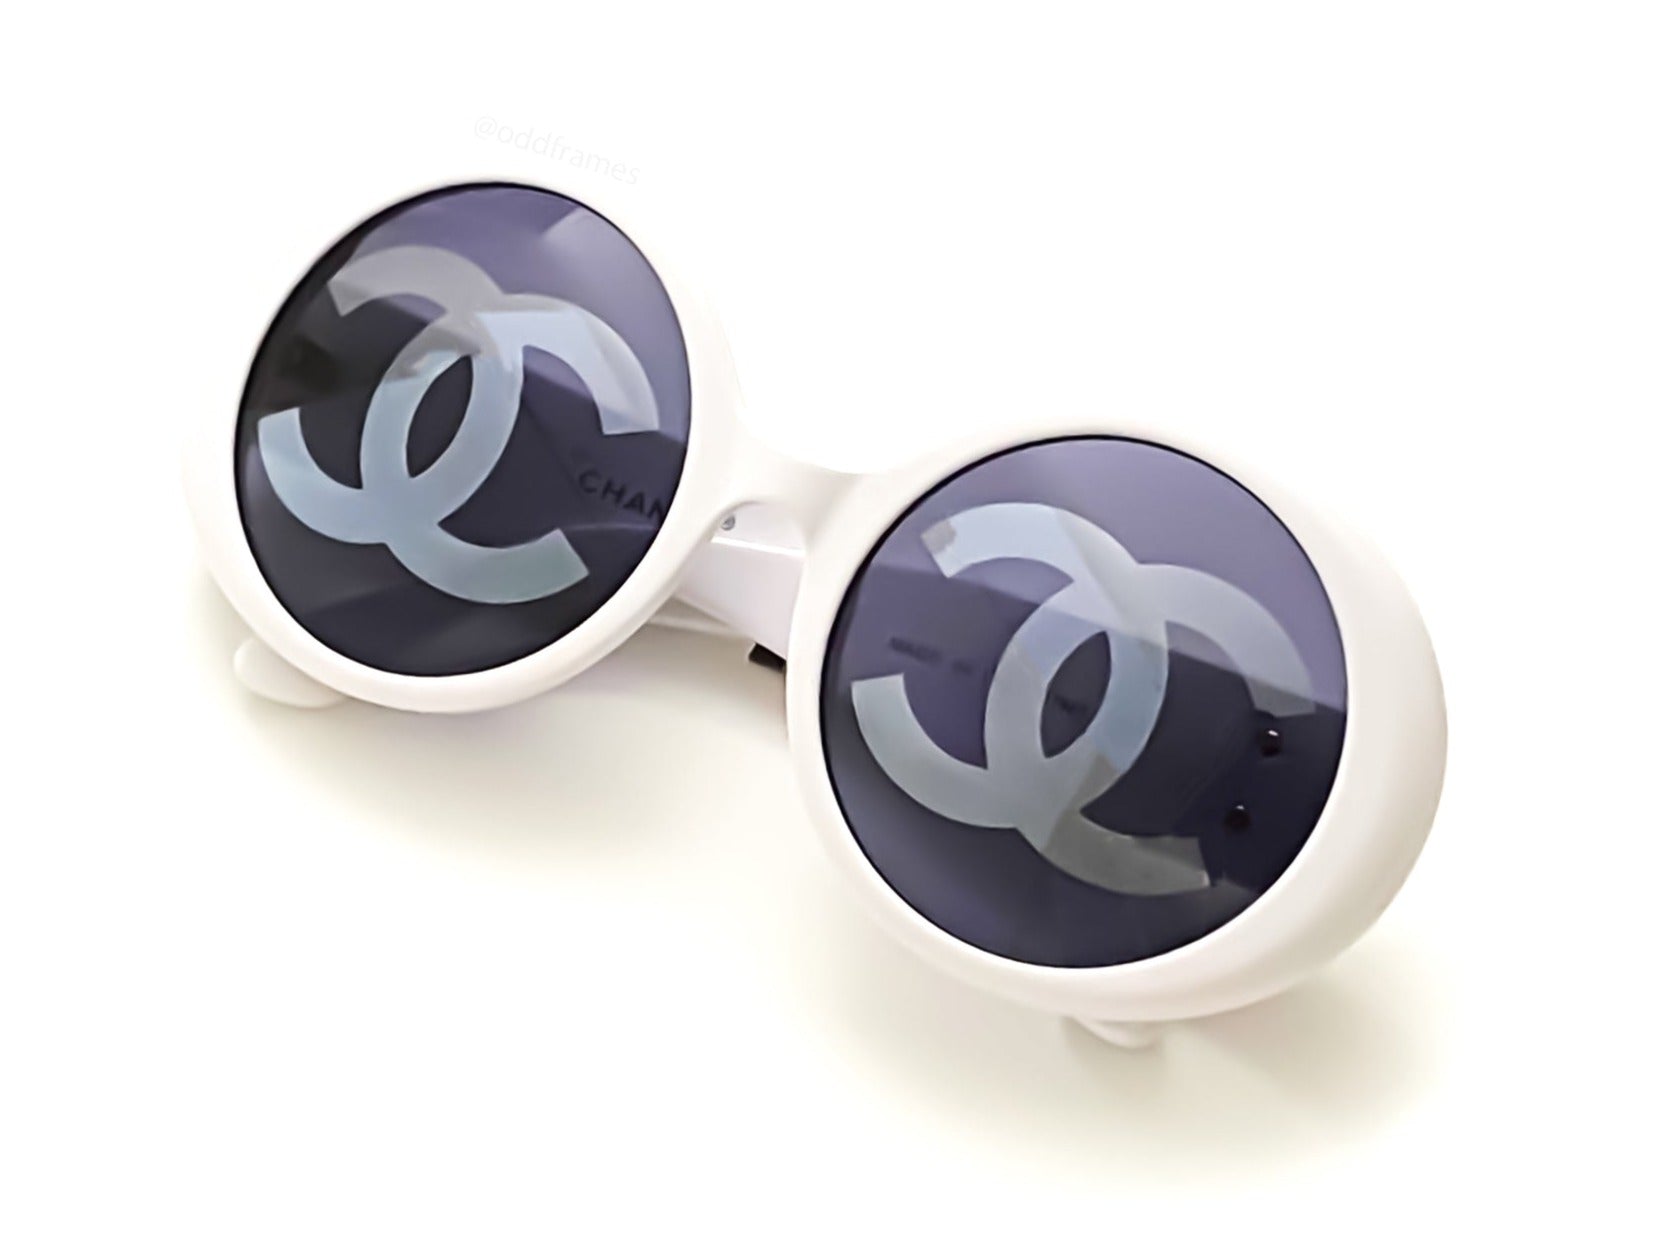 EXTREMELY RARE VINTAGE chanel white round sunglasses 01944 10601 authentic  $690.00 - PicClick